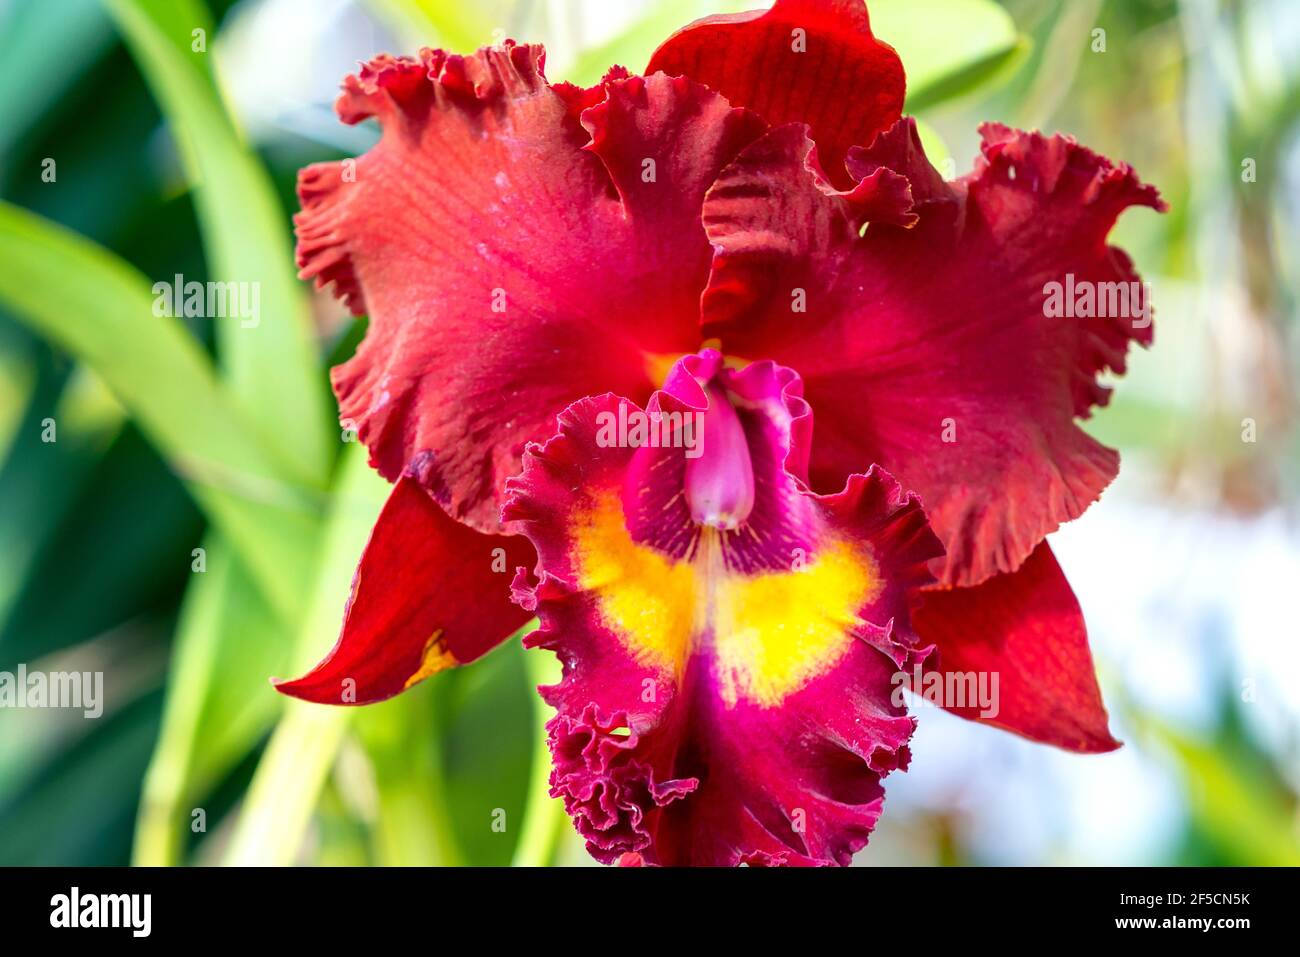 Cattleya Labiata flowers bloom in the spring sunshine, a rare forest orchid decorated in tropical gardens 2021 Stock Photo